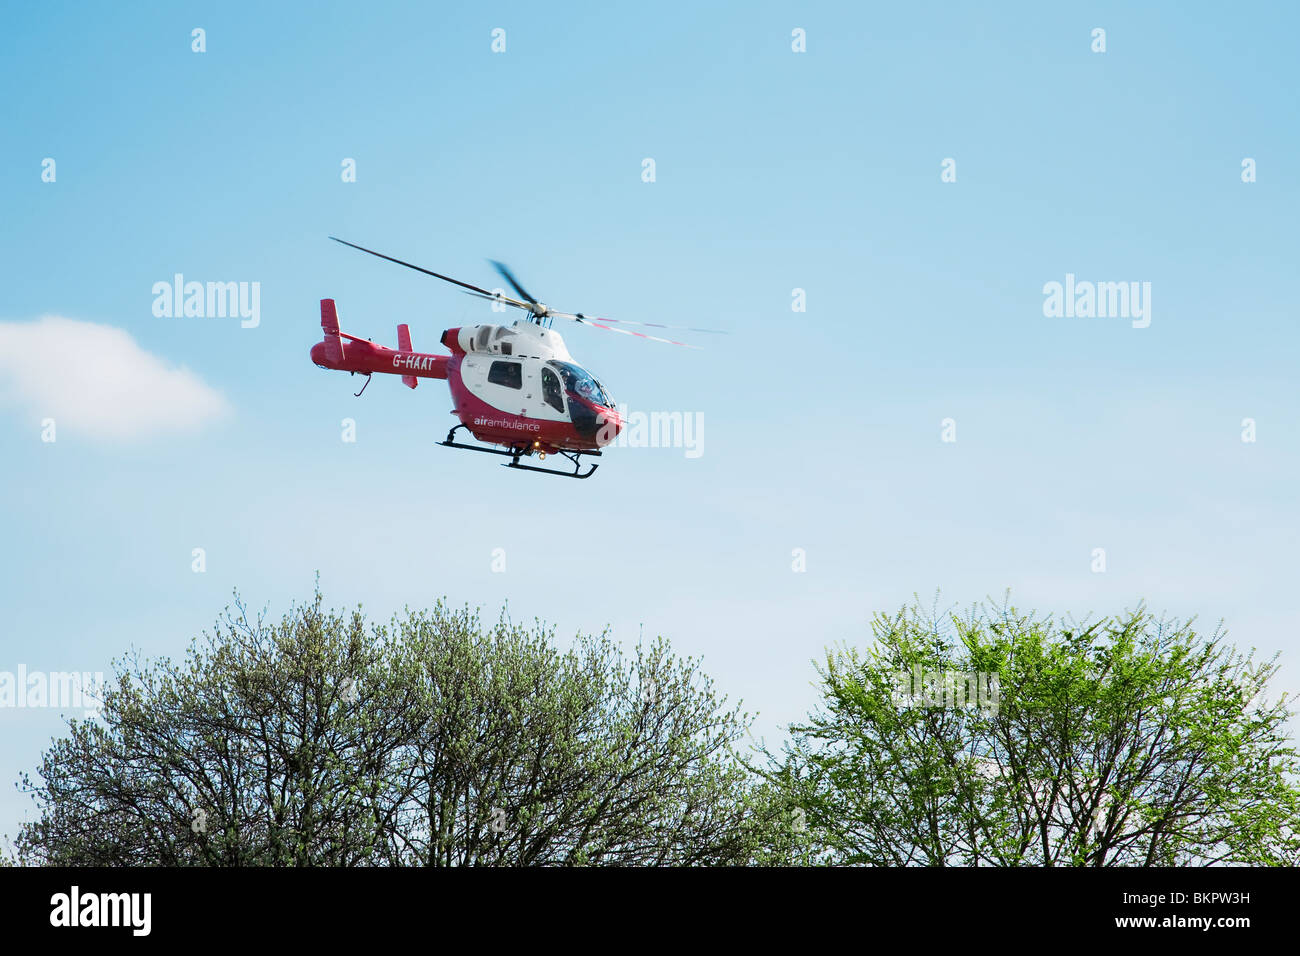 Air Ambulance Helicopter Stock Photo - Alamy